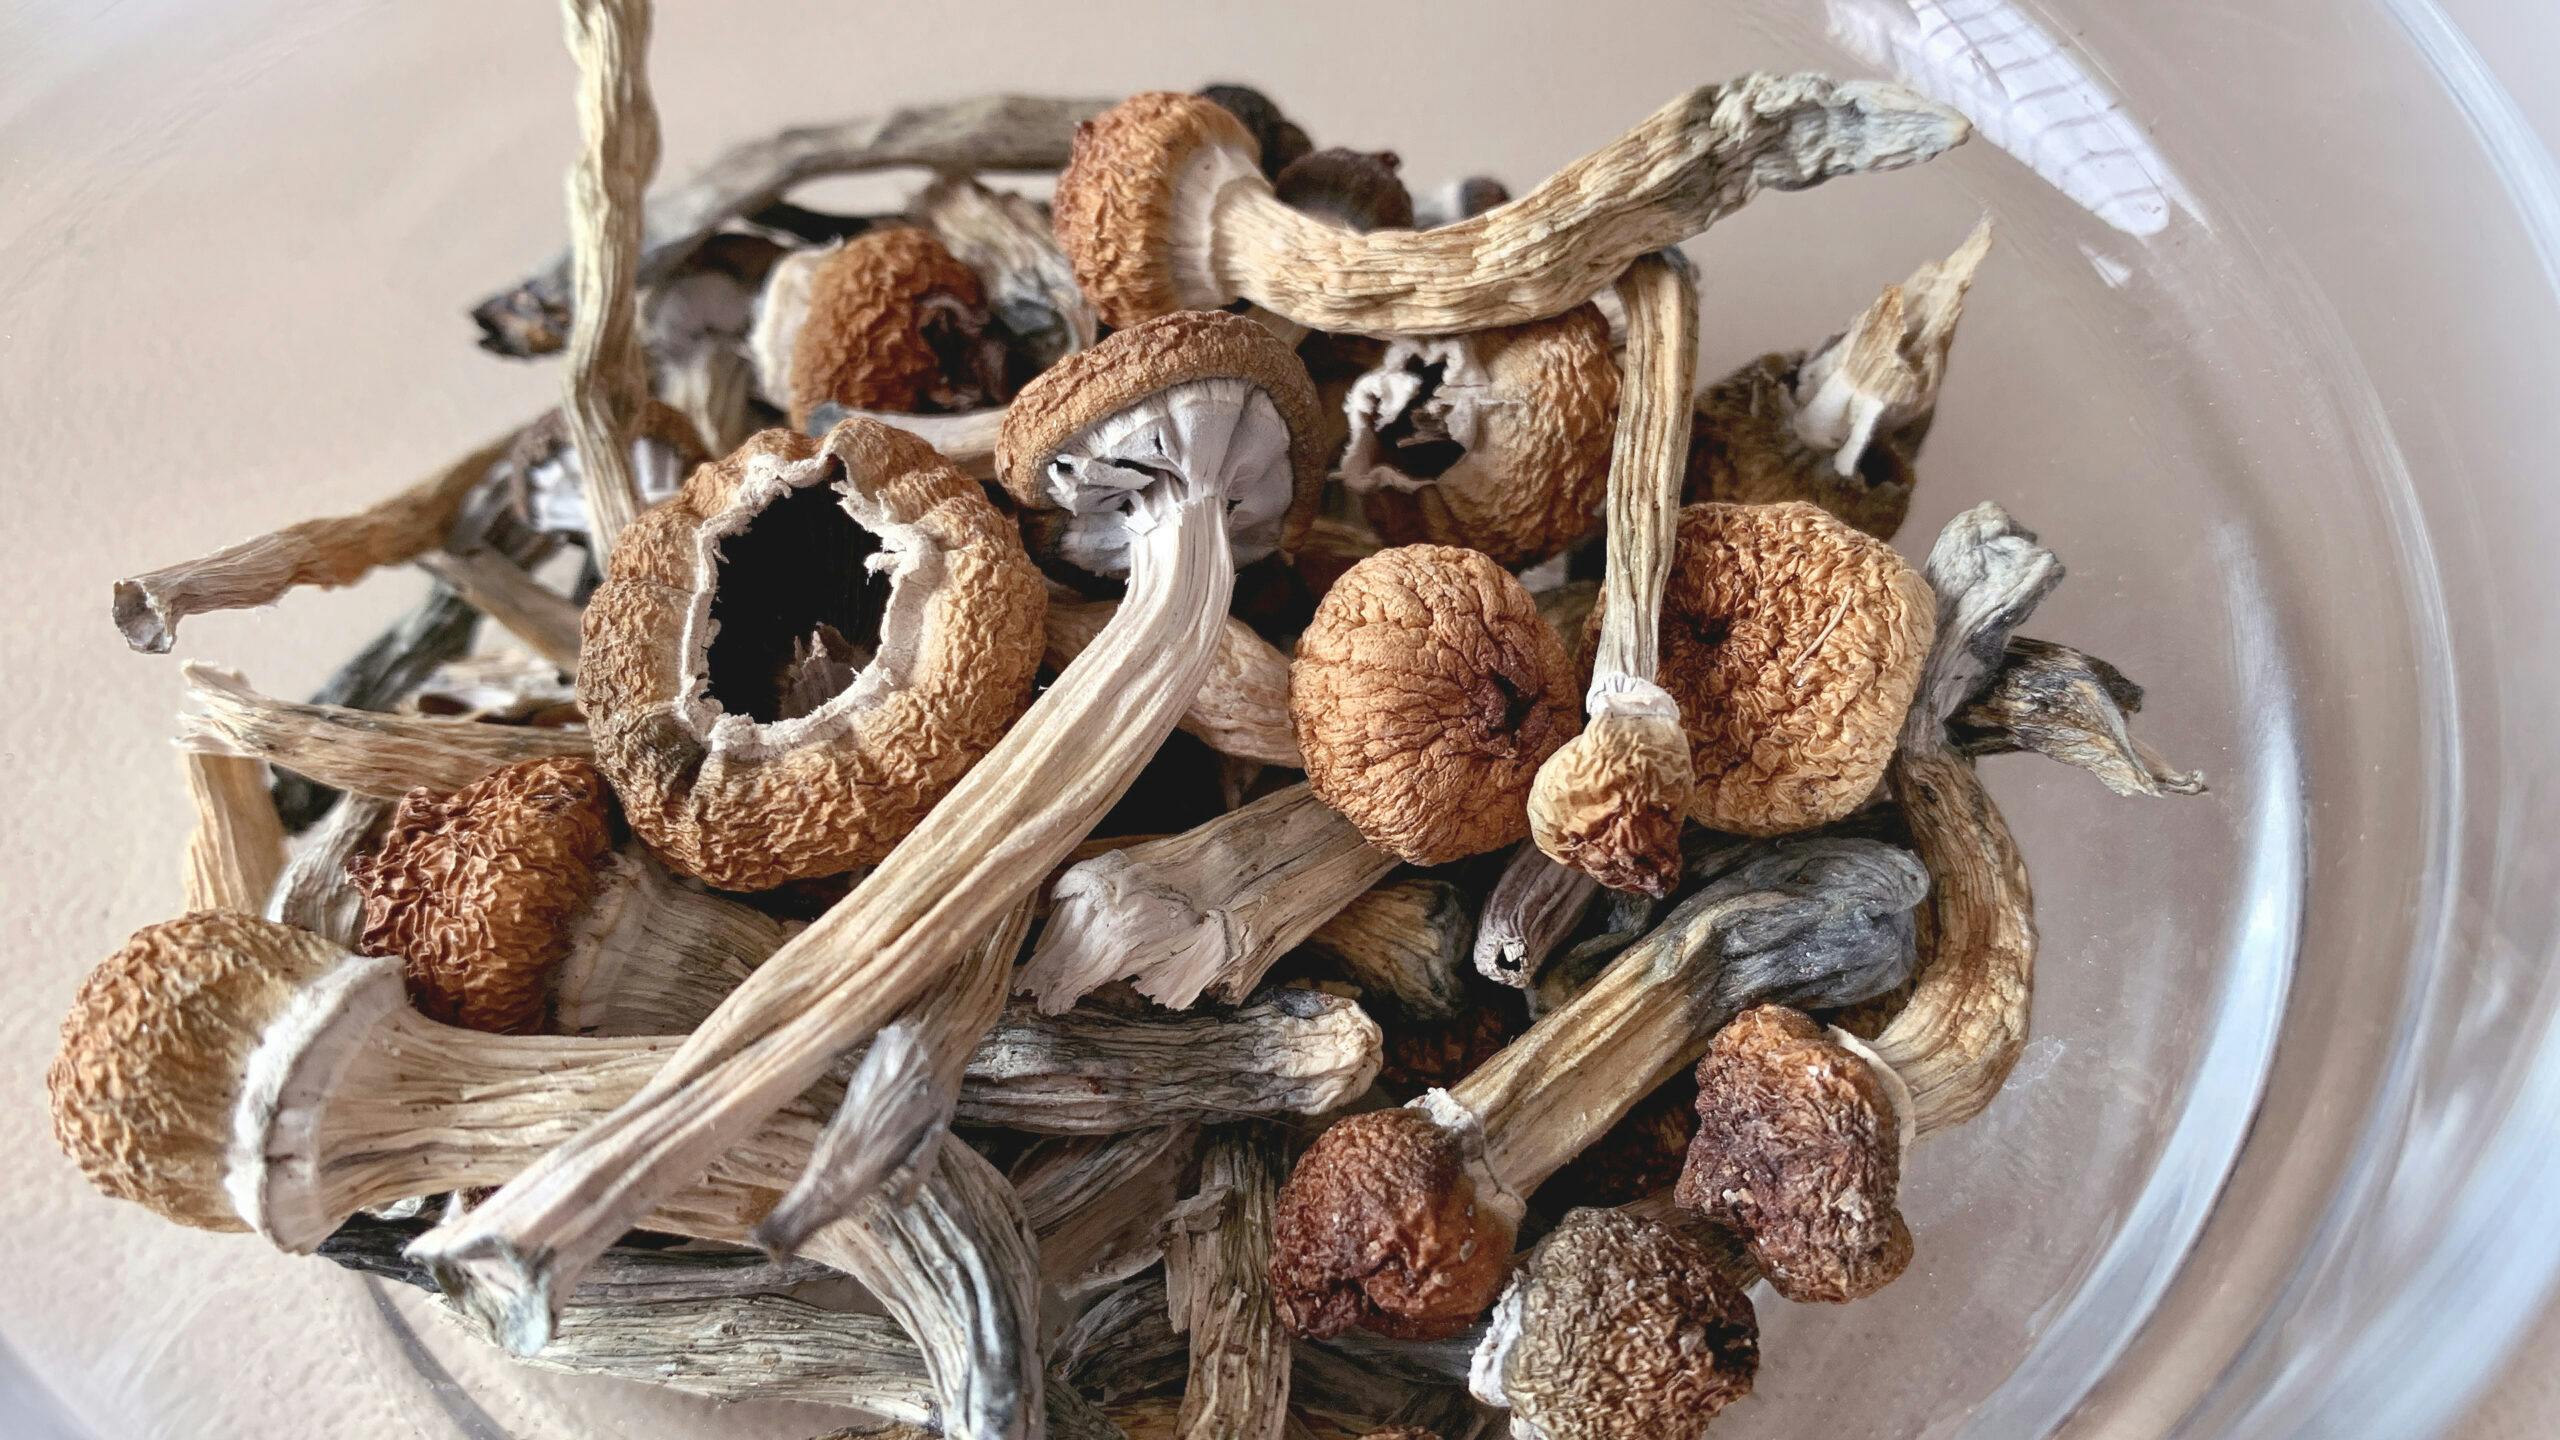 Do Shrooms Go Bad? How to Dry and Store Your Shrooms